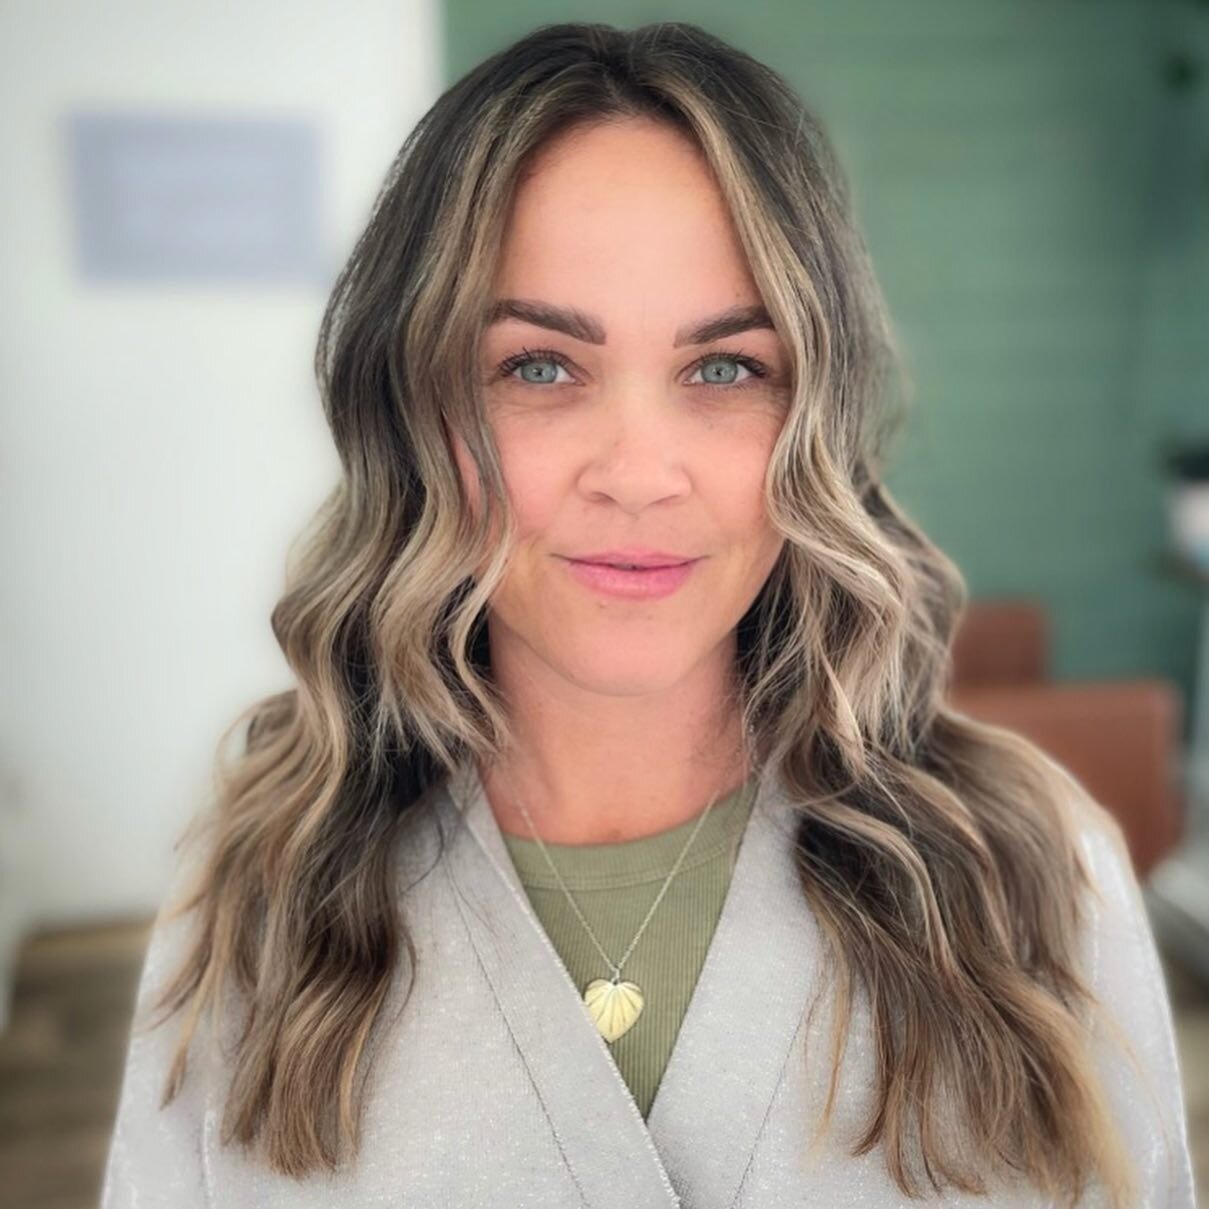 Summer is here. It&rsquo;s time to lighten things up! We&rsquo;re here to oblige. June appointments are limited, July is filling up quickly. Message us for your appointment today. 

Hair by 👩🏻&zwj;🎨✨Daniela Leiva